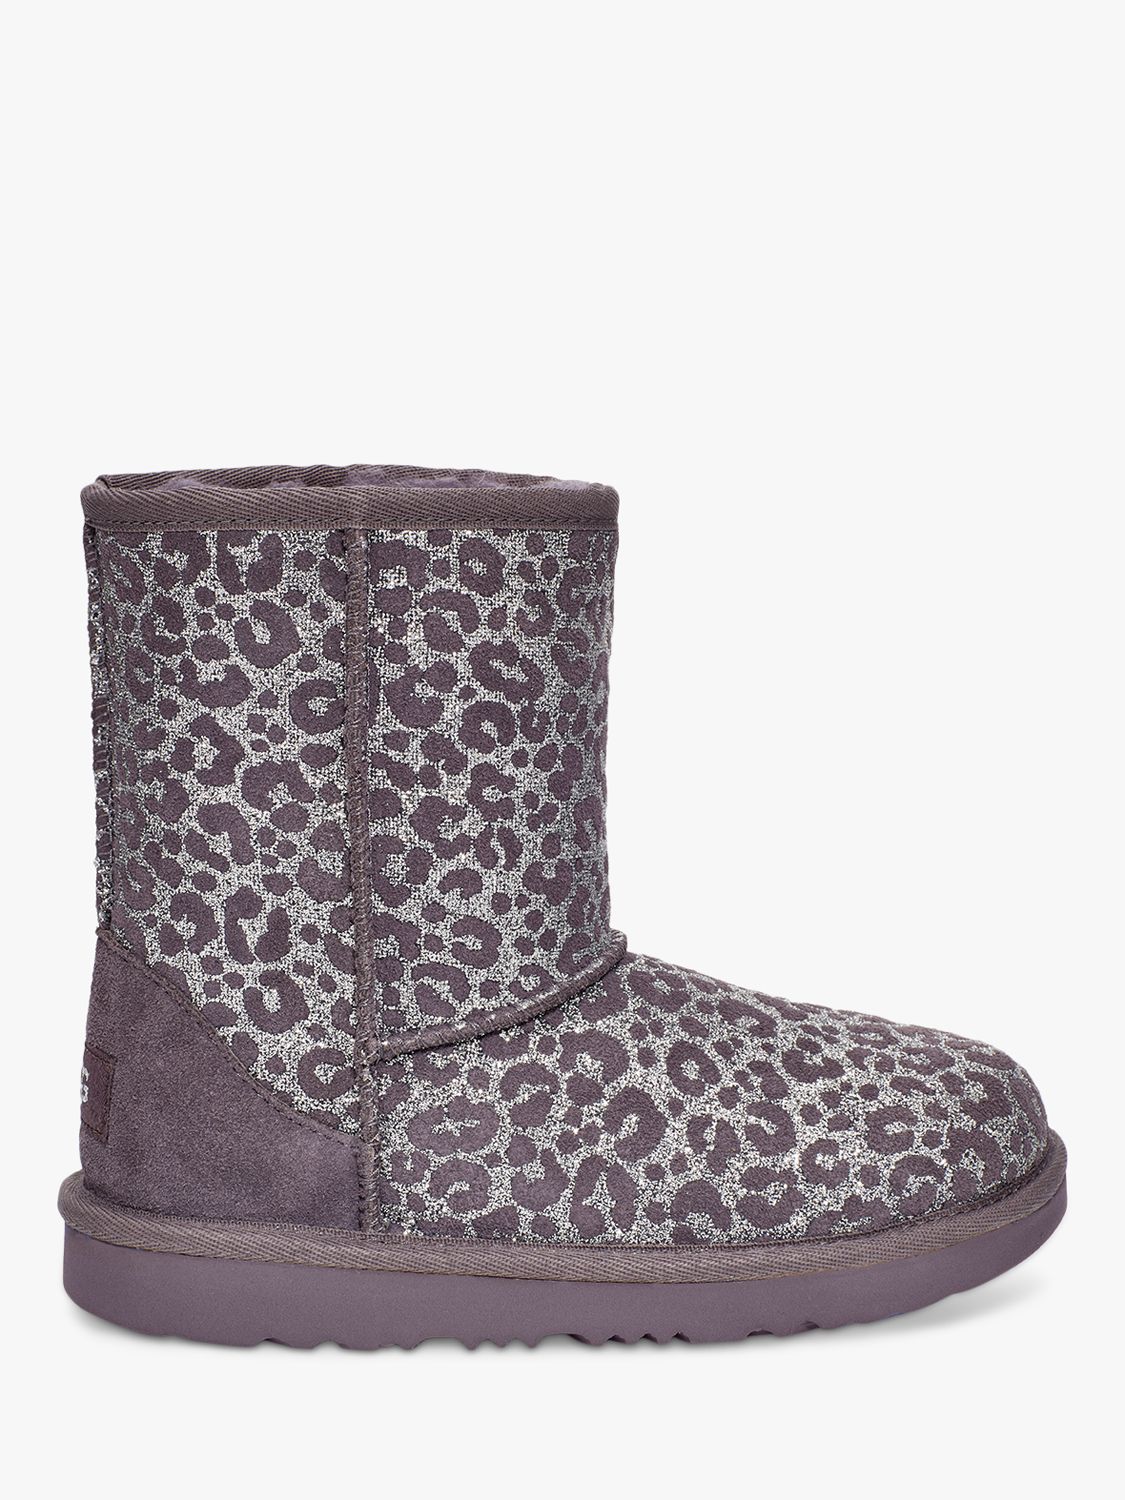 ugg boots with leopard print